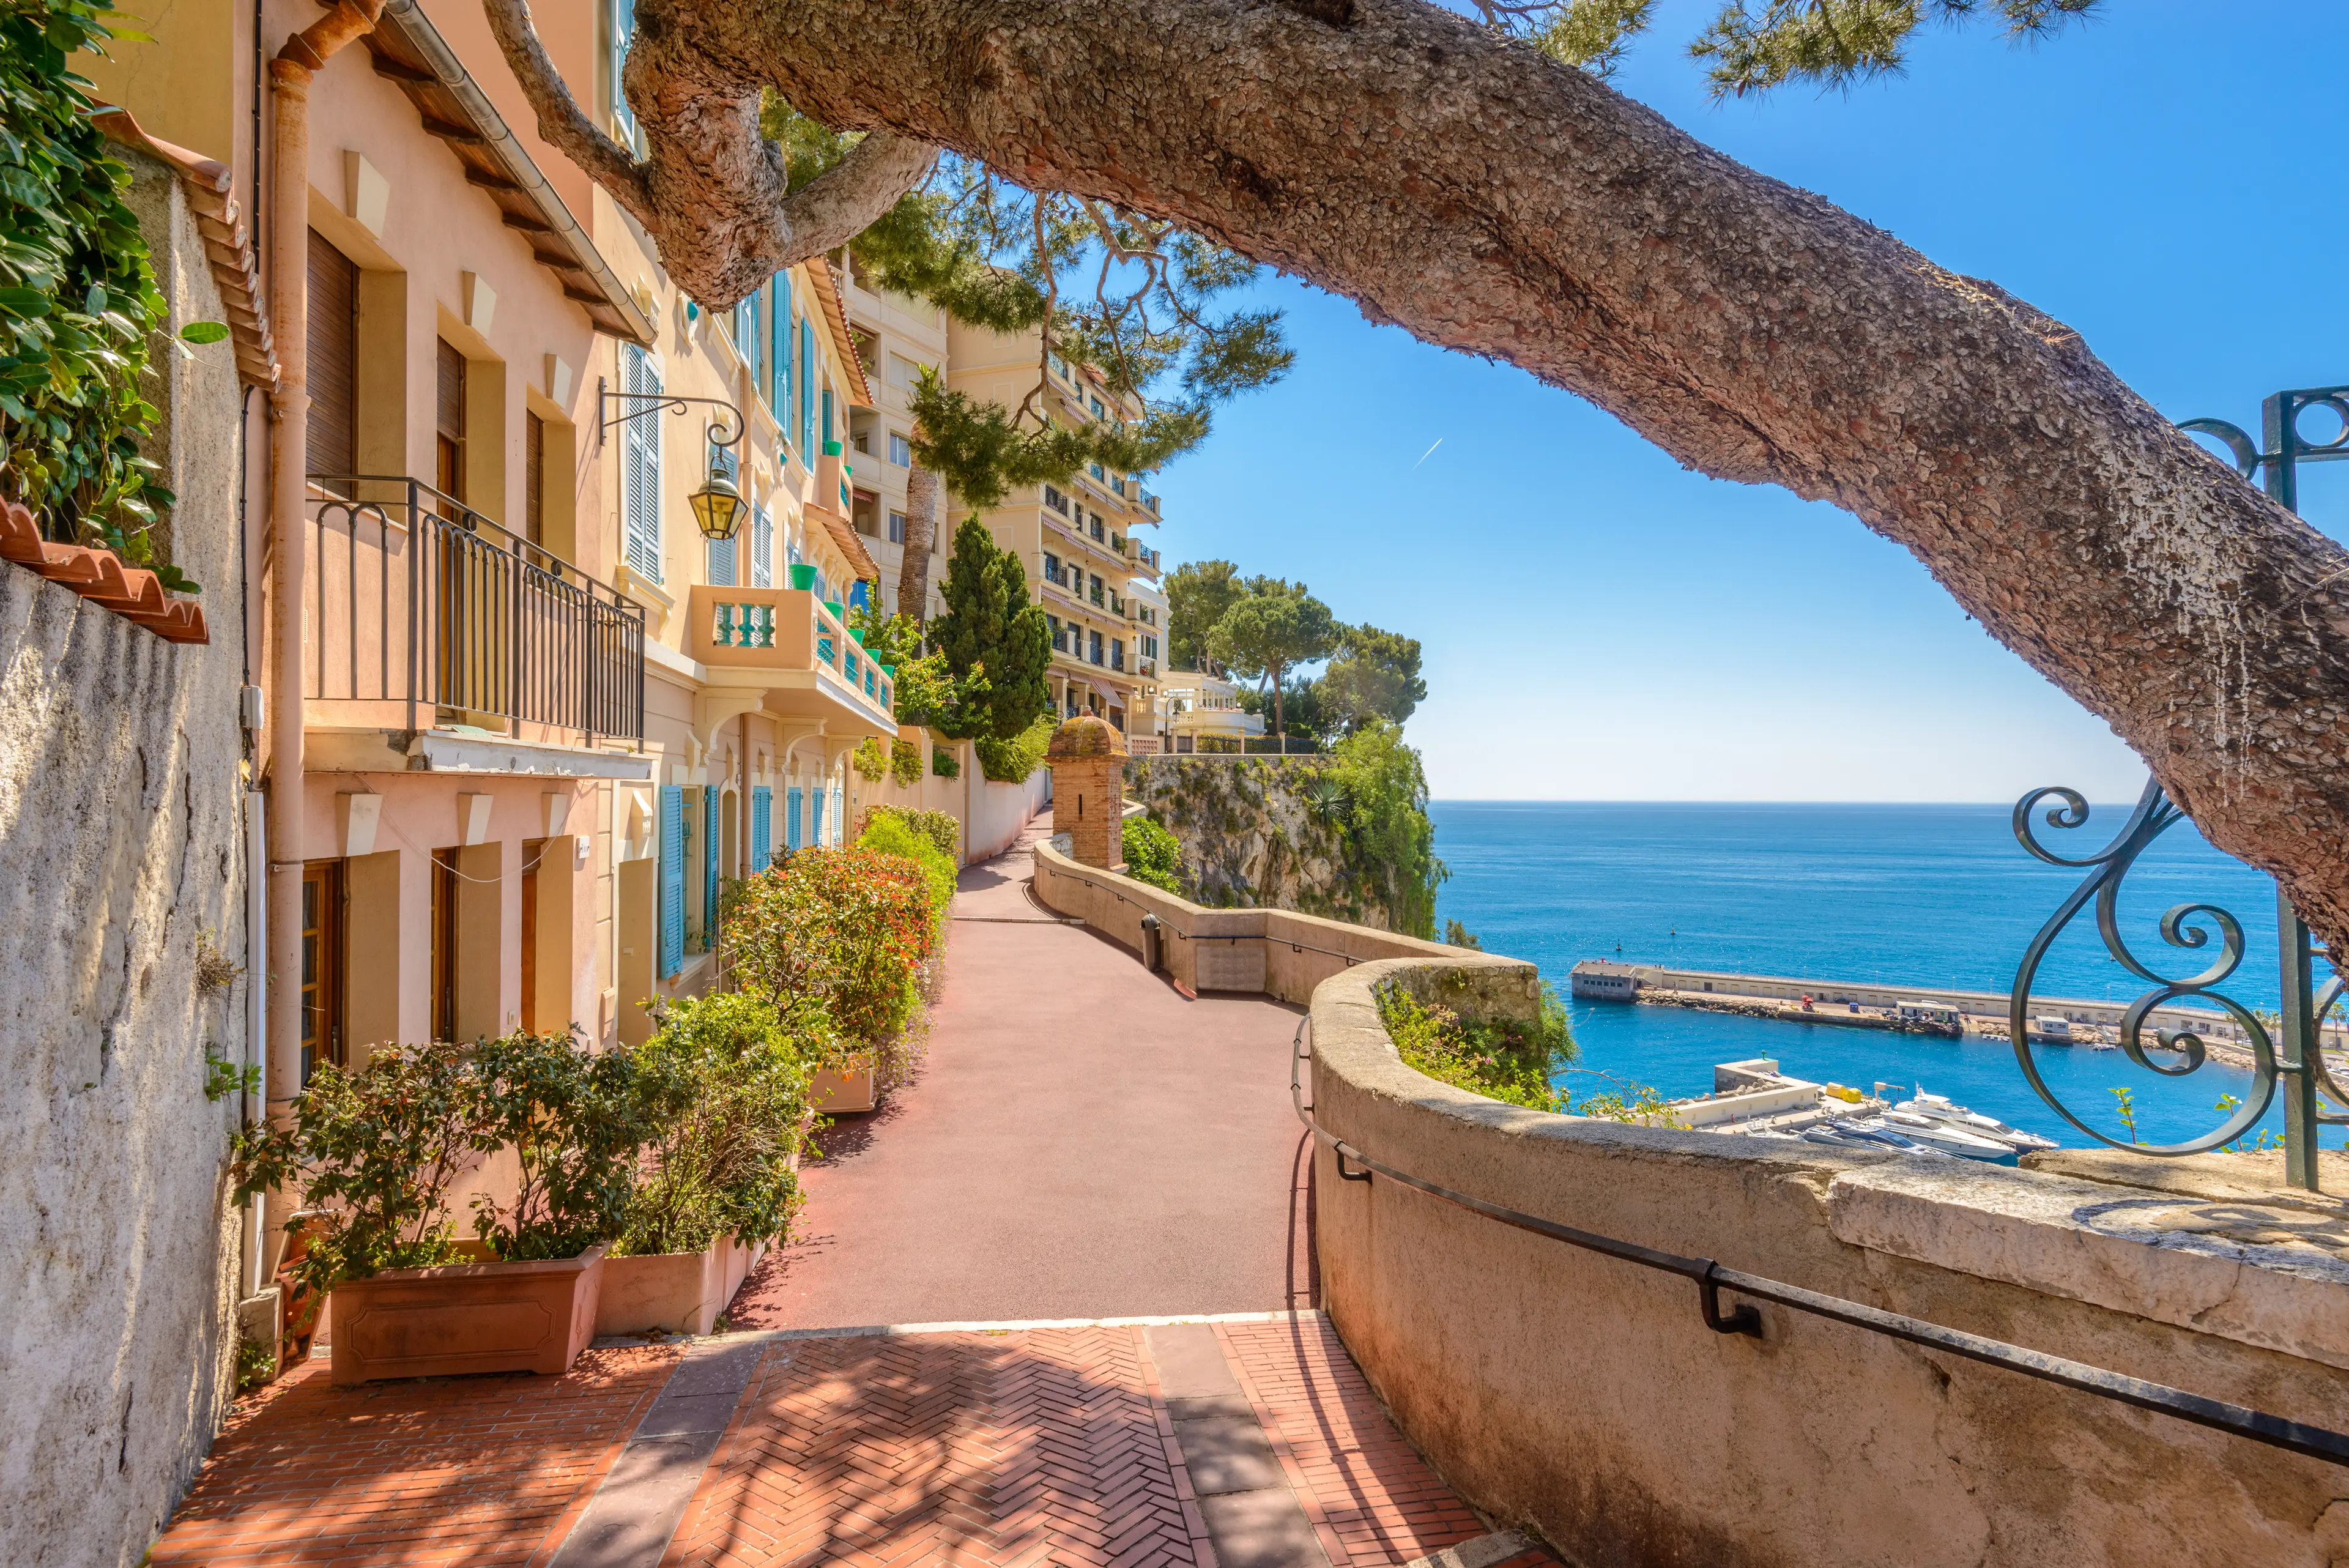 1-Day Monaco Wine, Dine and Relaxation Tour for Couples